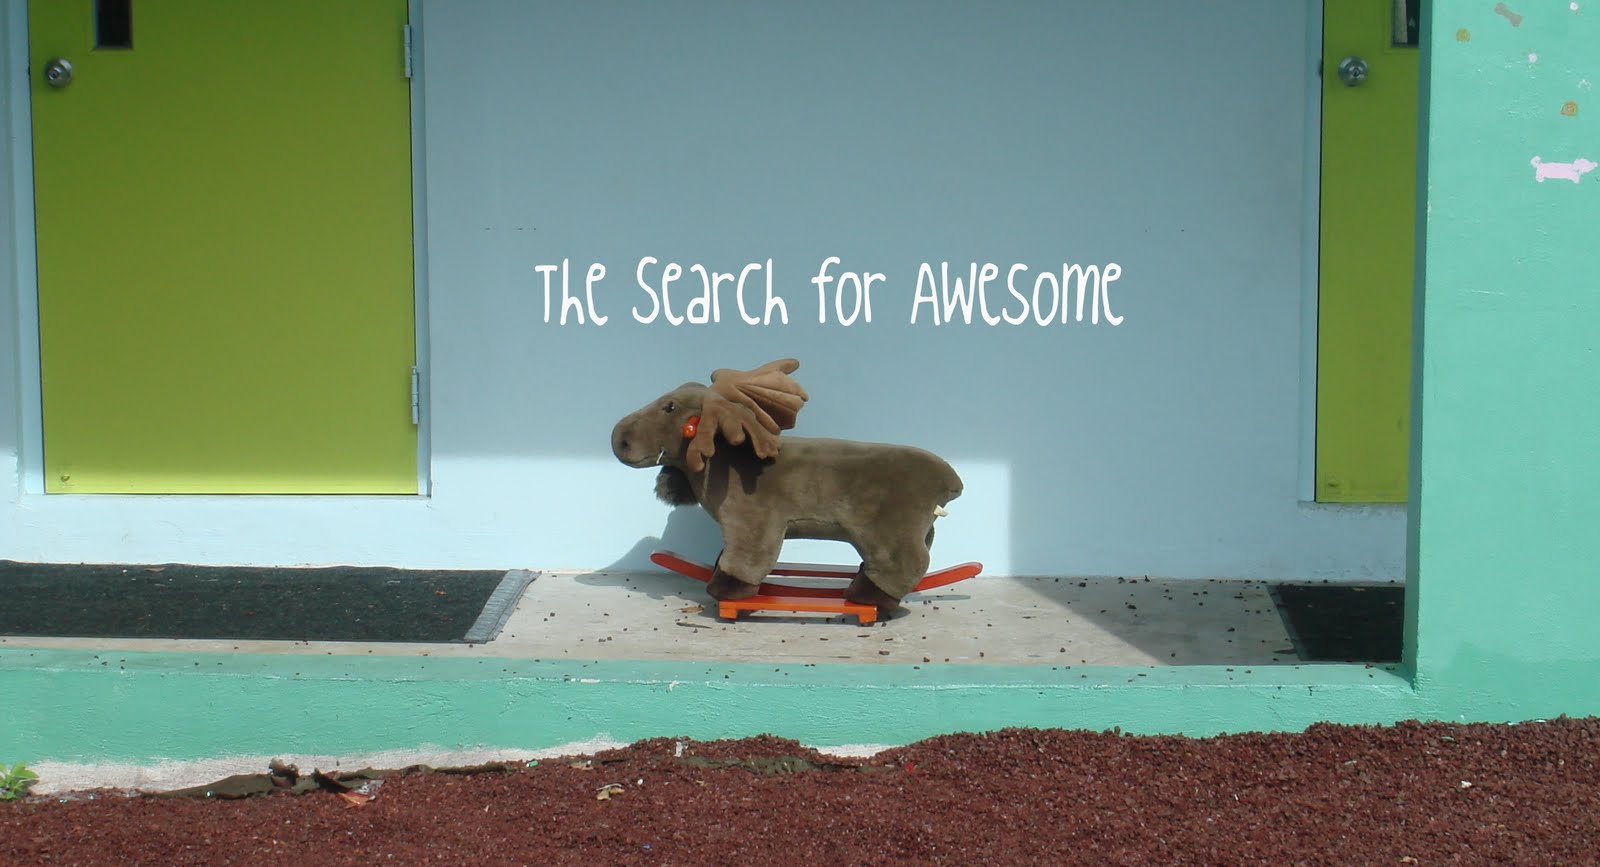 The Search for Awesome